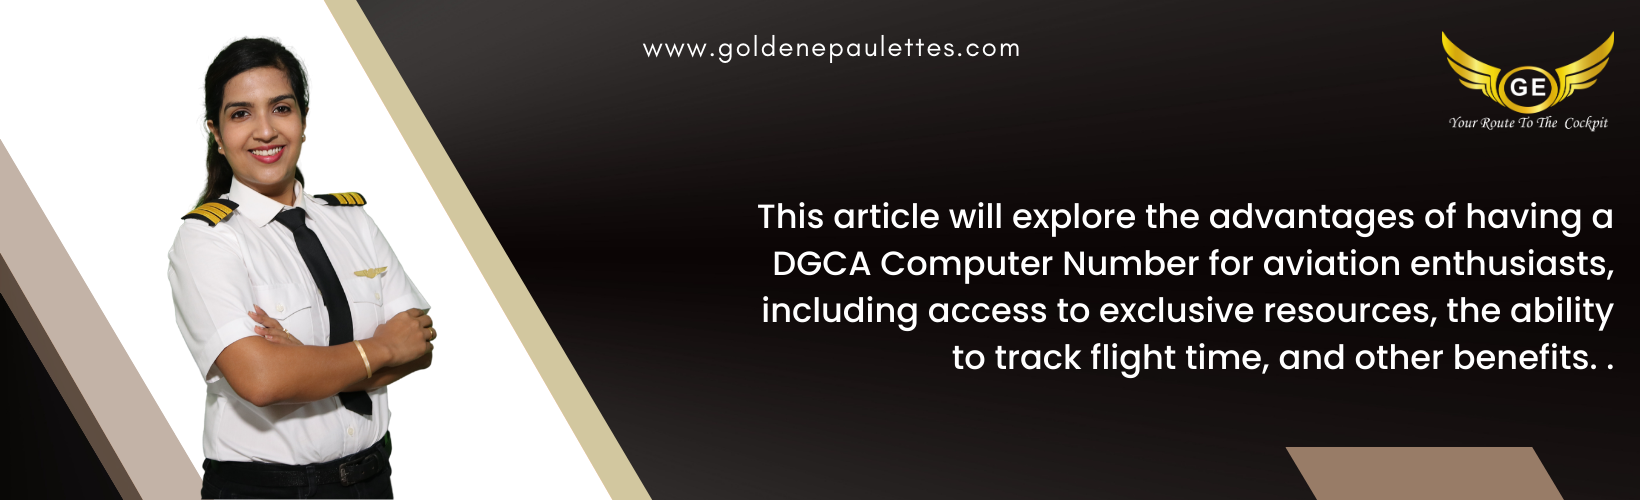 The Benefits of a DGCA Computer Number for Aviation Enthusiasts